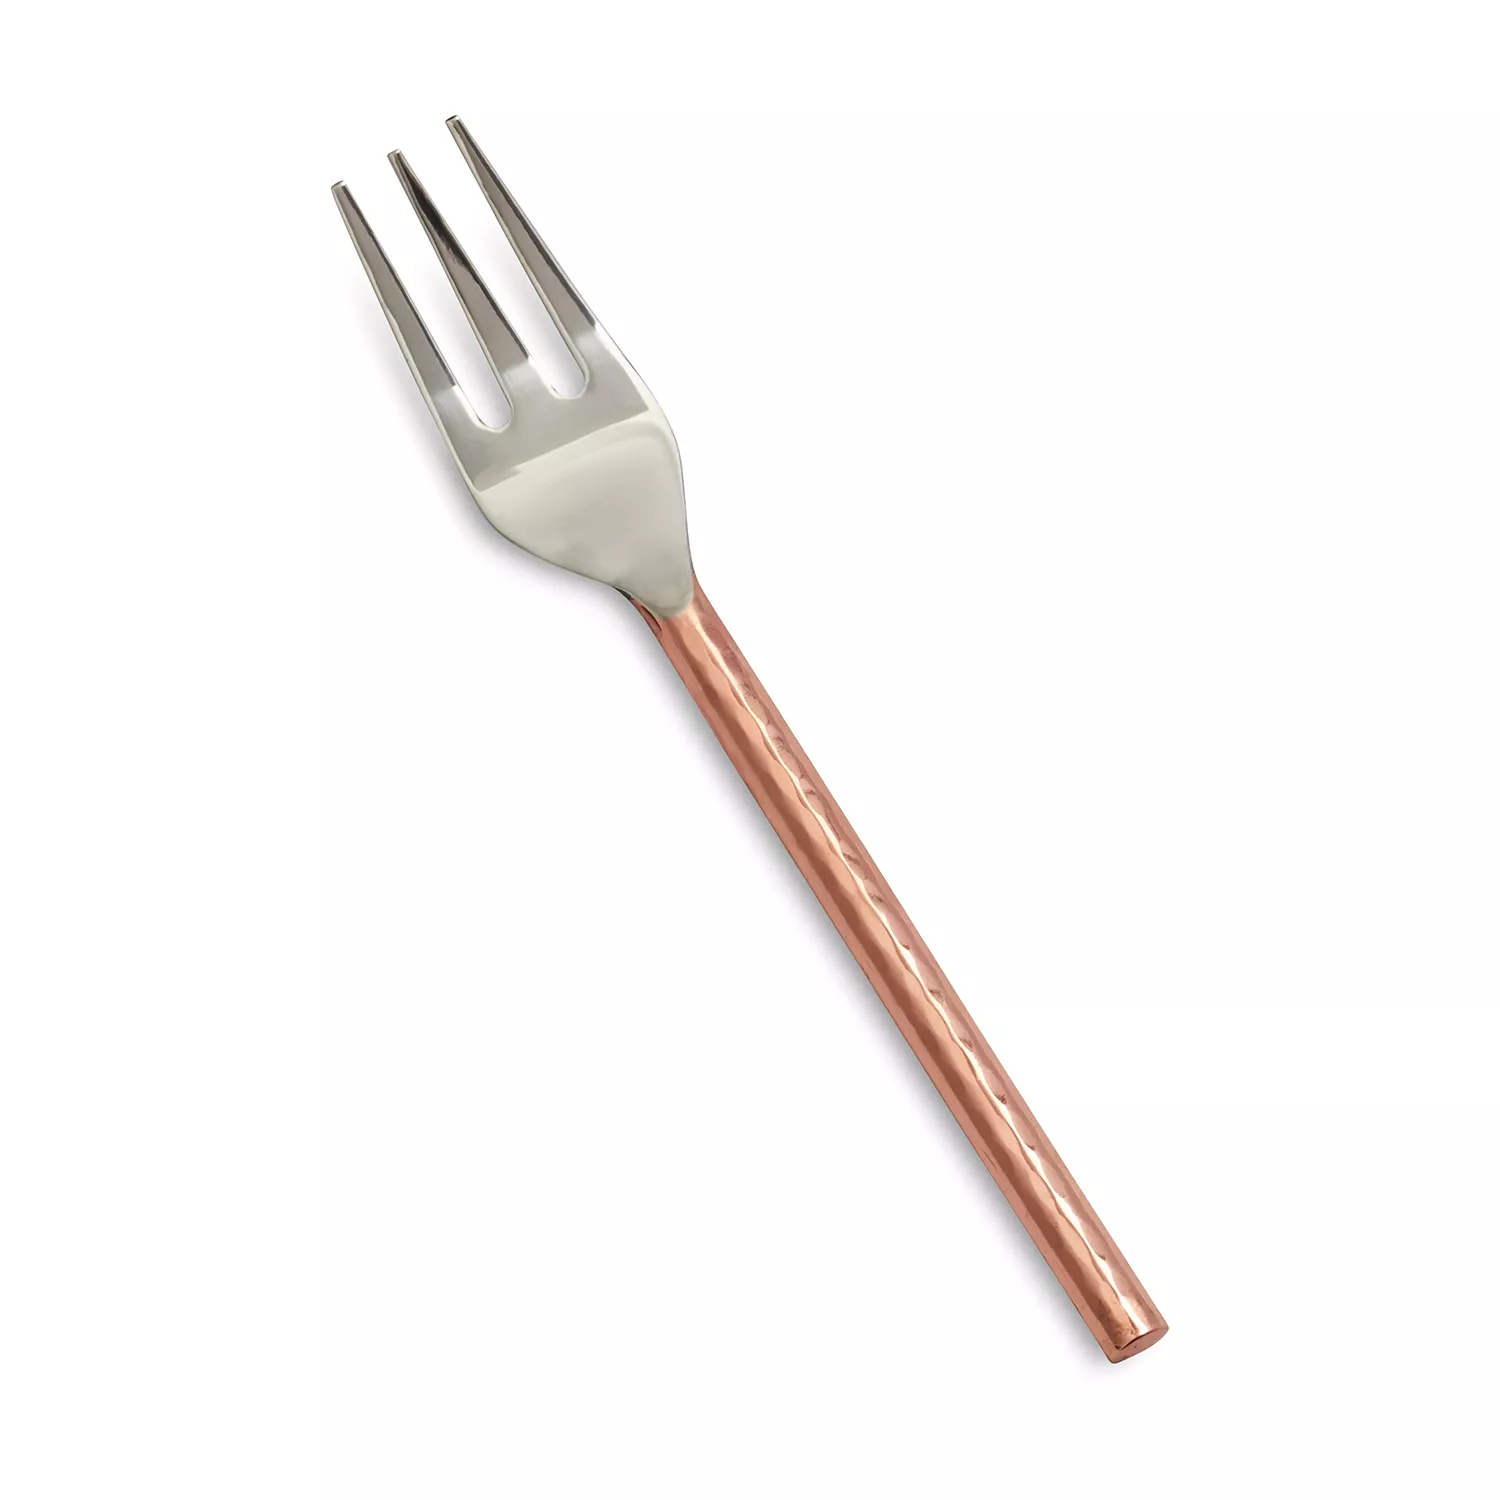 Copper Finish Stainless Steel Appetizer Forks